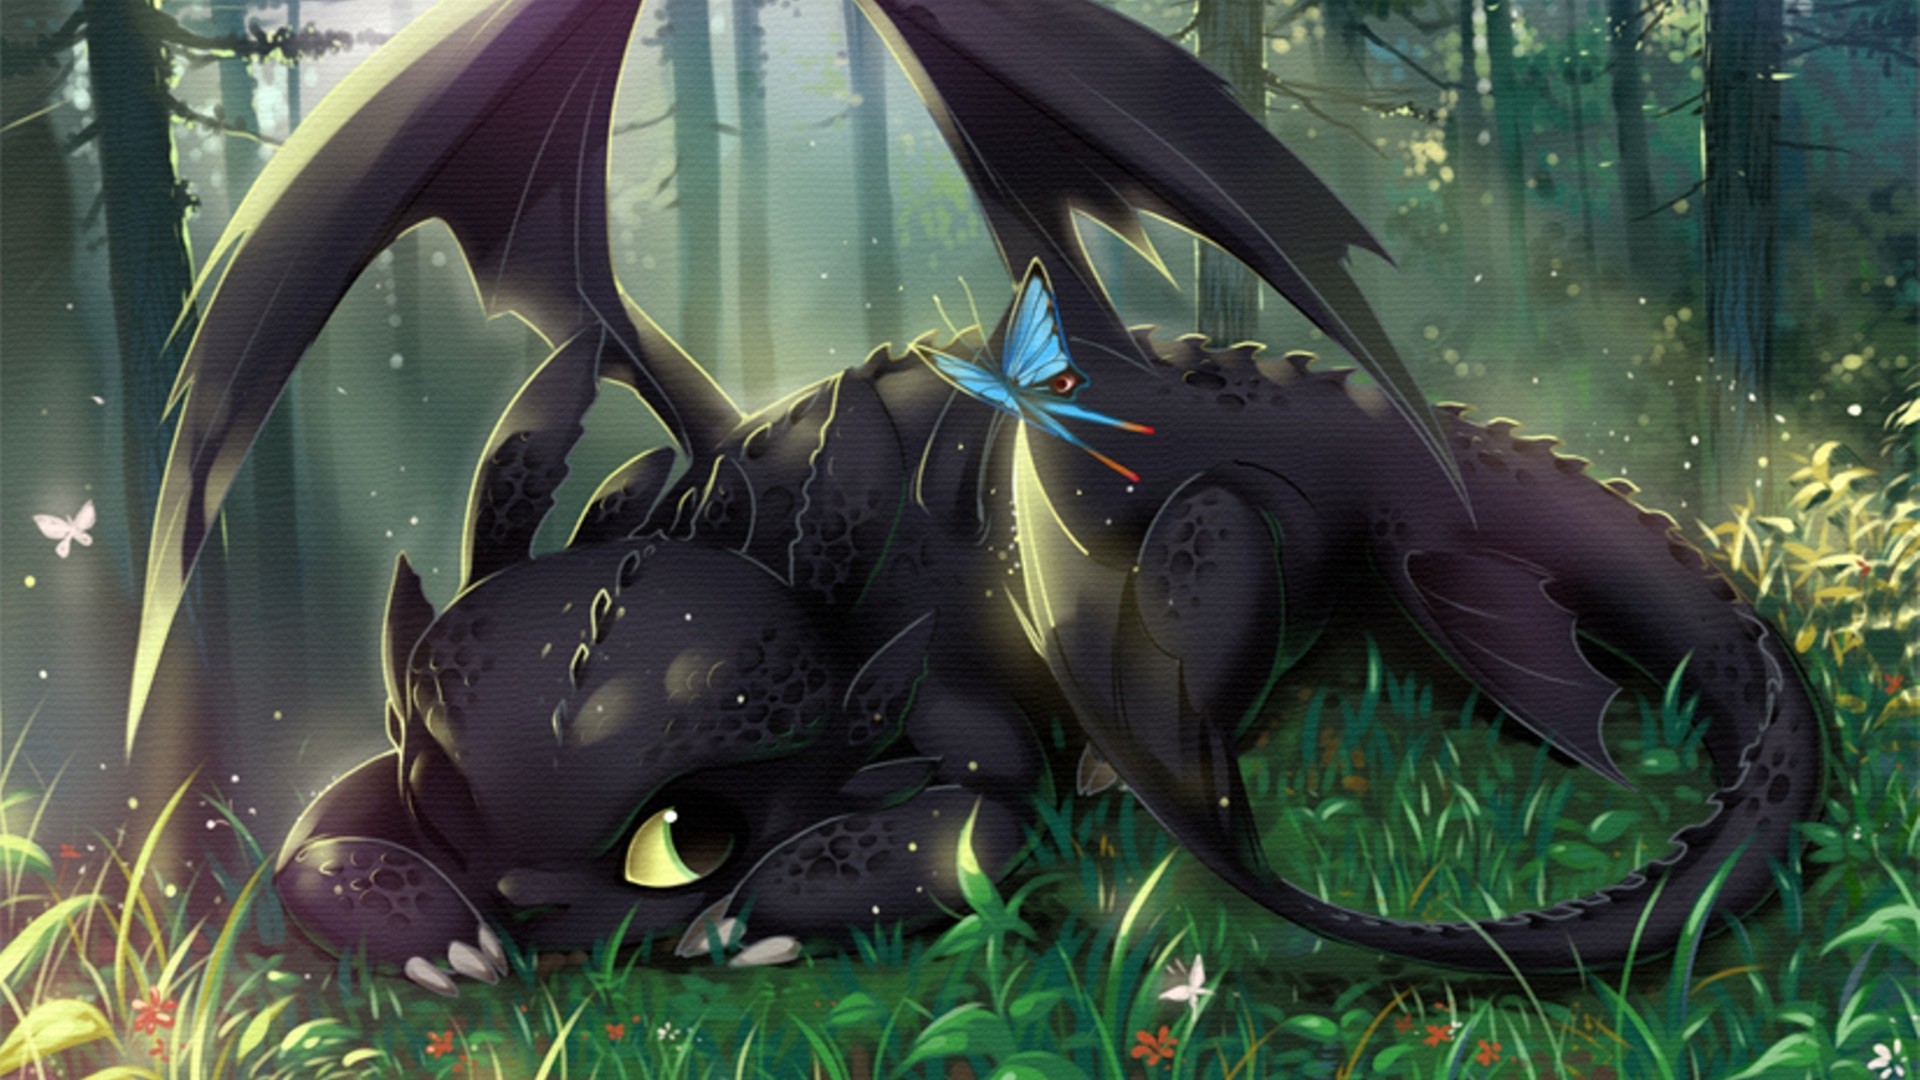 How To Train Your Dragon, Toothless Wallpapers HD / Desktop and Mobile Backgrounds